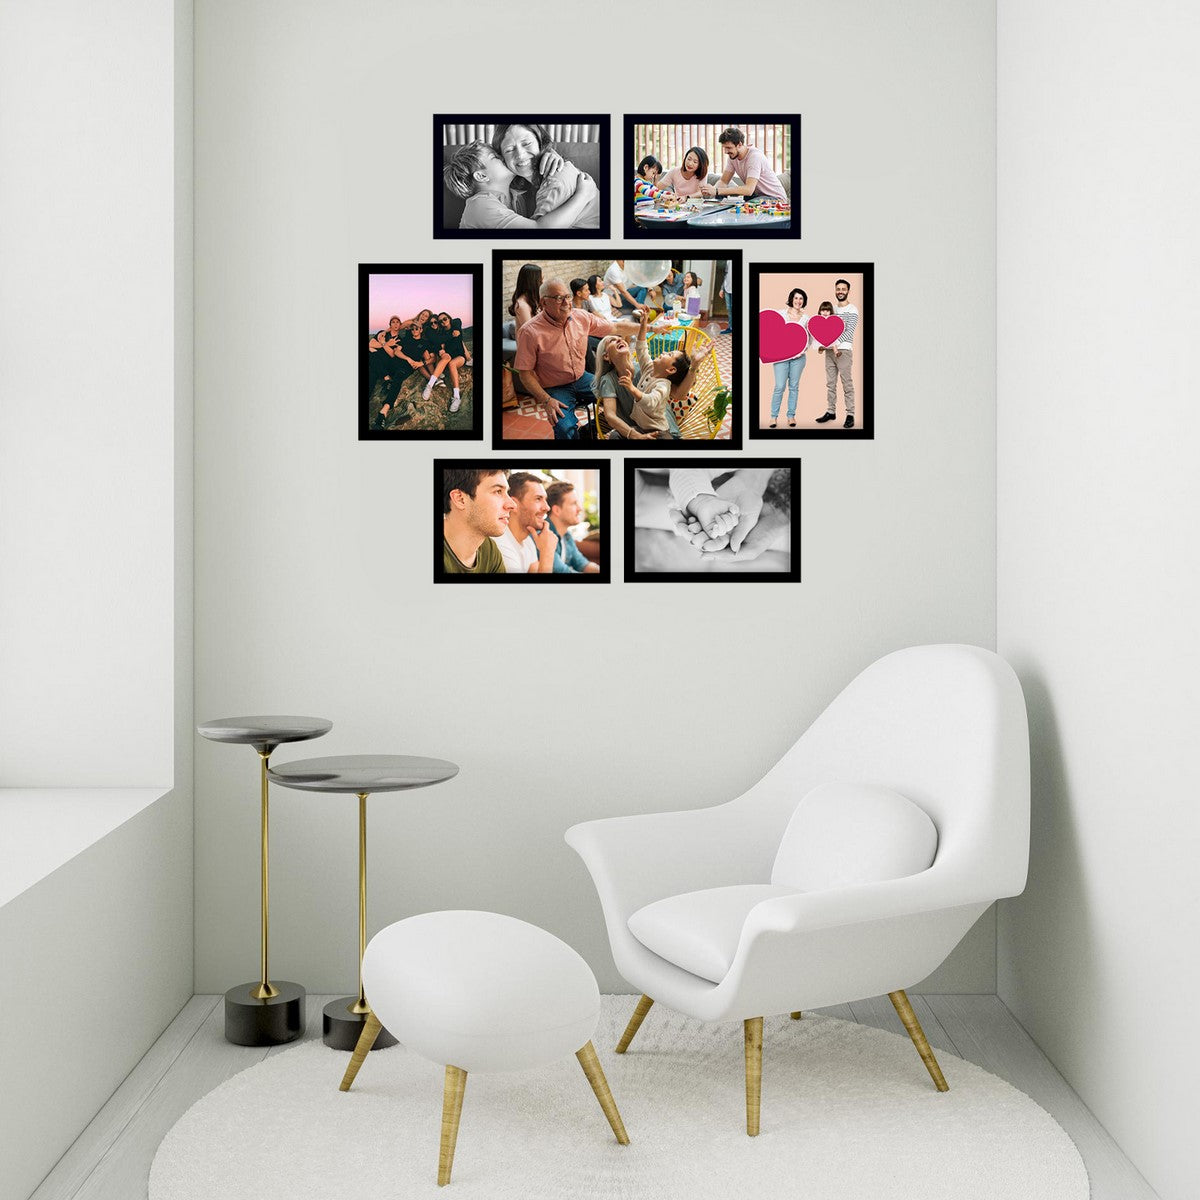 Memory Wall Collage Photo Frame - Set of 7 Photo Frames for 6 Photos of 5"x7", 1 Photos of 8"x10" 2